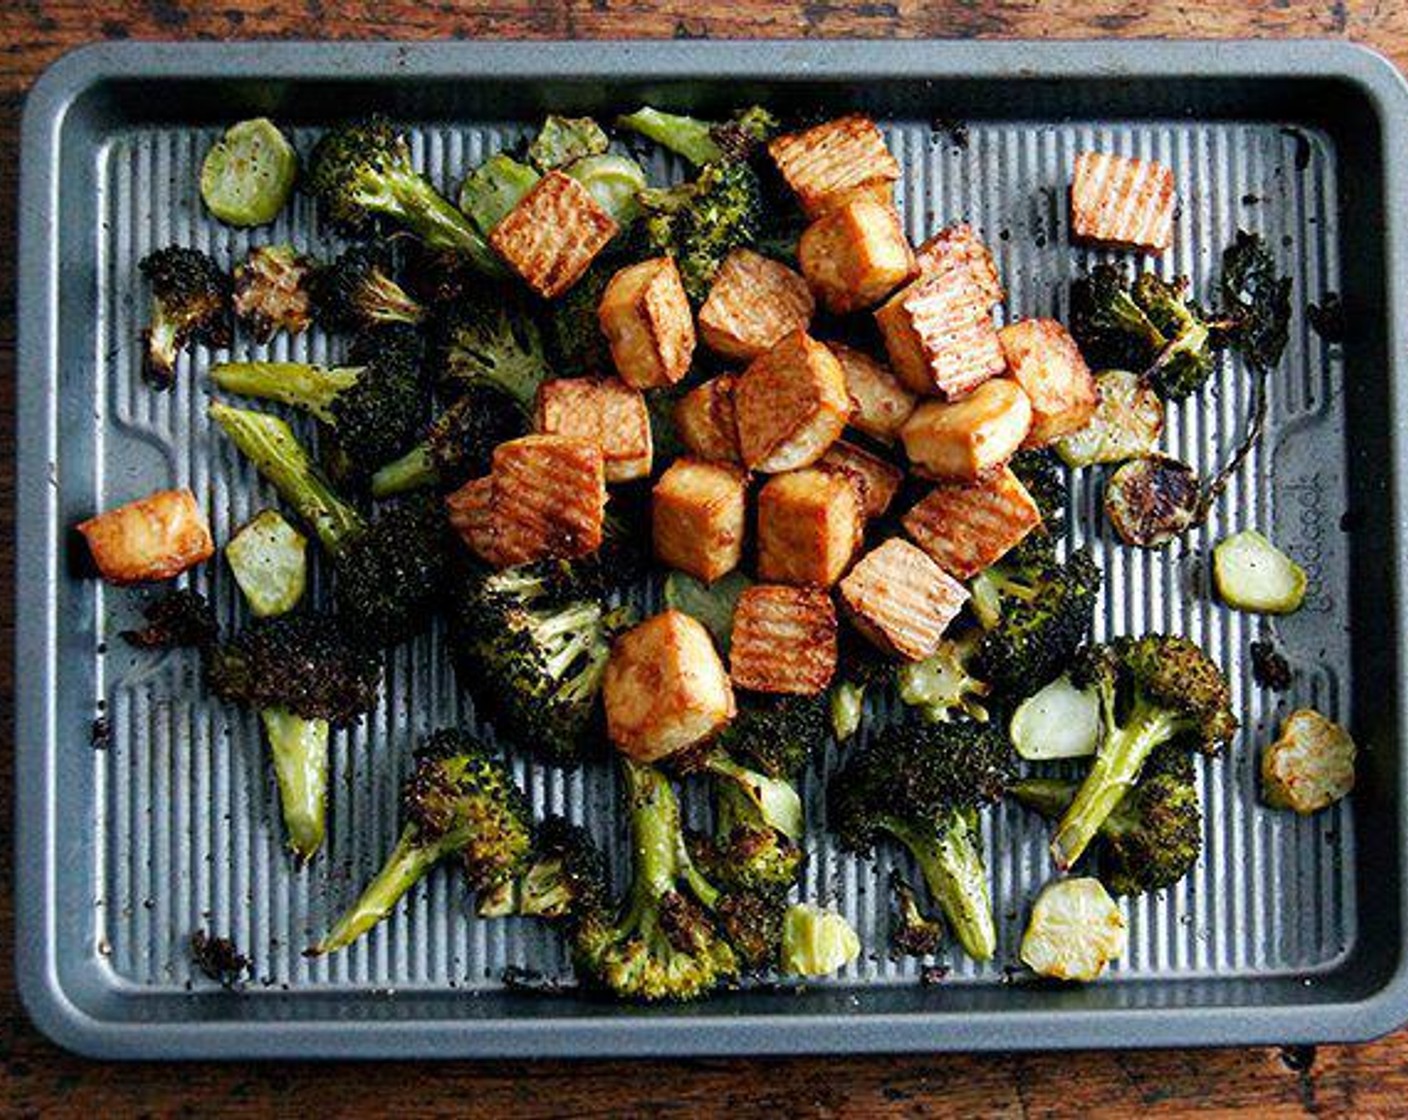 step 6 Cook the tofu and broccoli: Place both sheet pans in the oven and roast for 20 minutes, then toss the pieces around for even coloring and roast another 10 minutes. At this point, the tofu is usually done, which is to say golden at the edges and lightly crisp. Remove the pan from the oven.